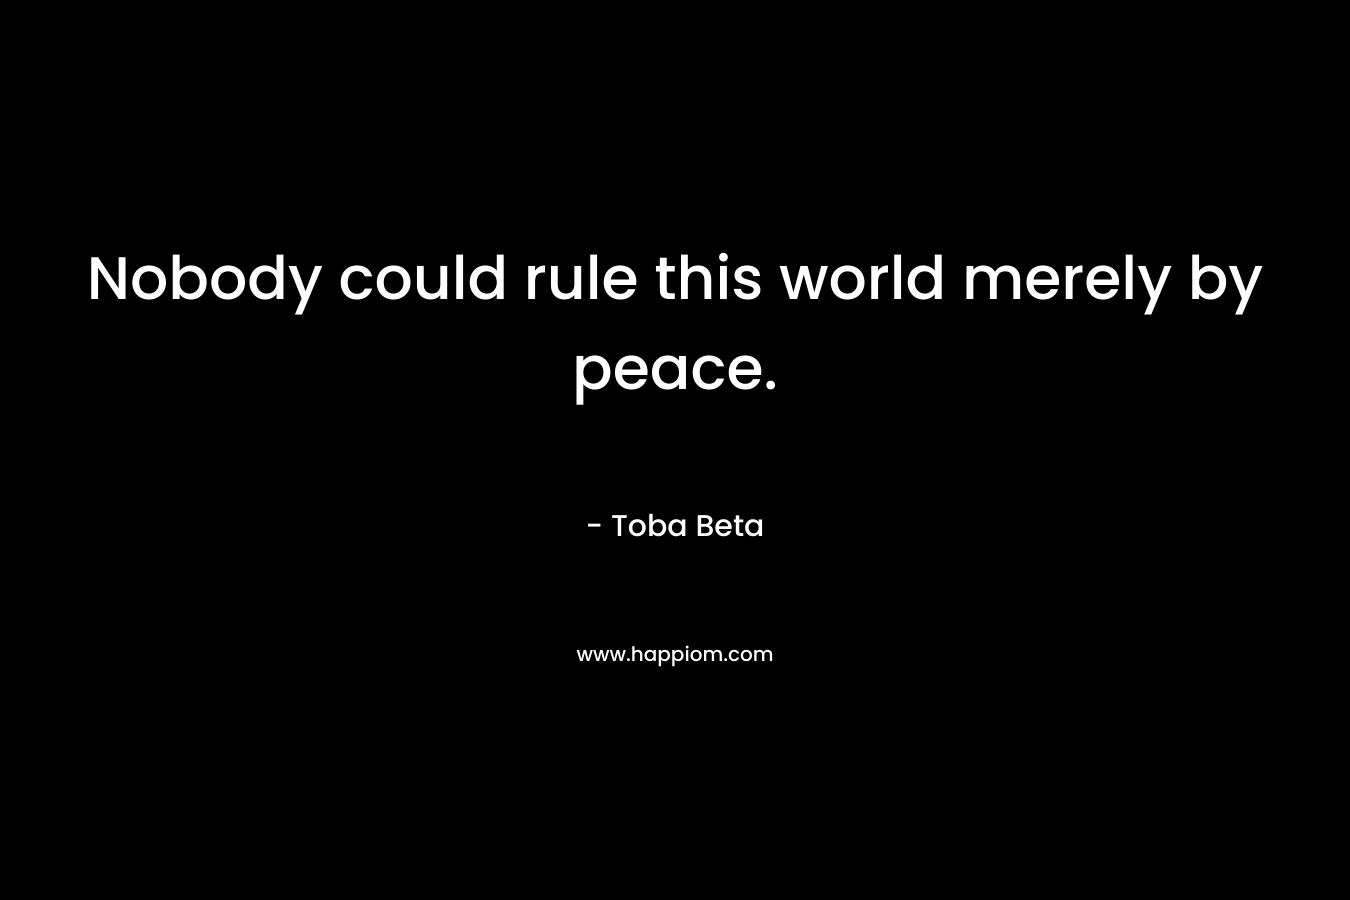 Nobody could rule this world merely by peace.